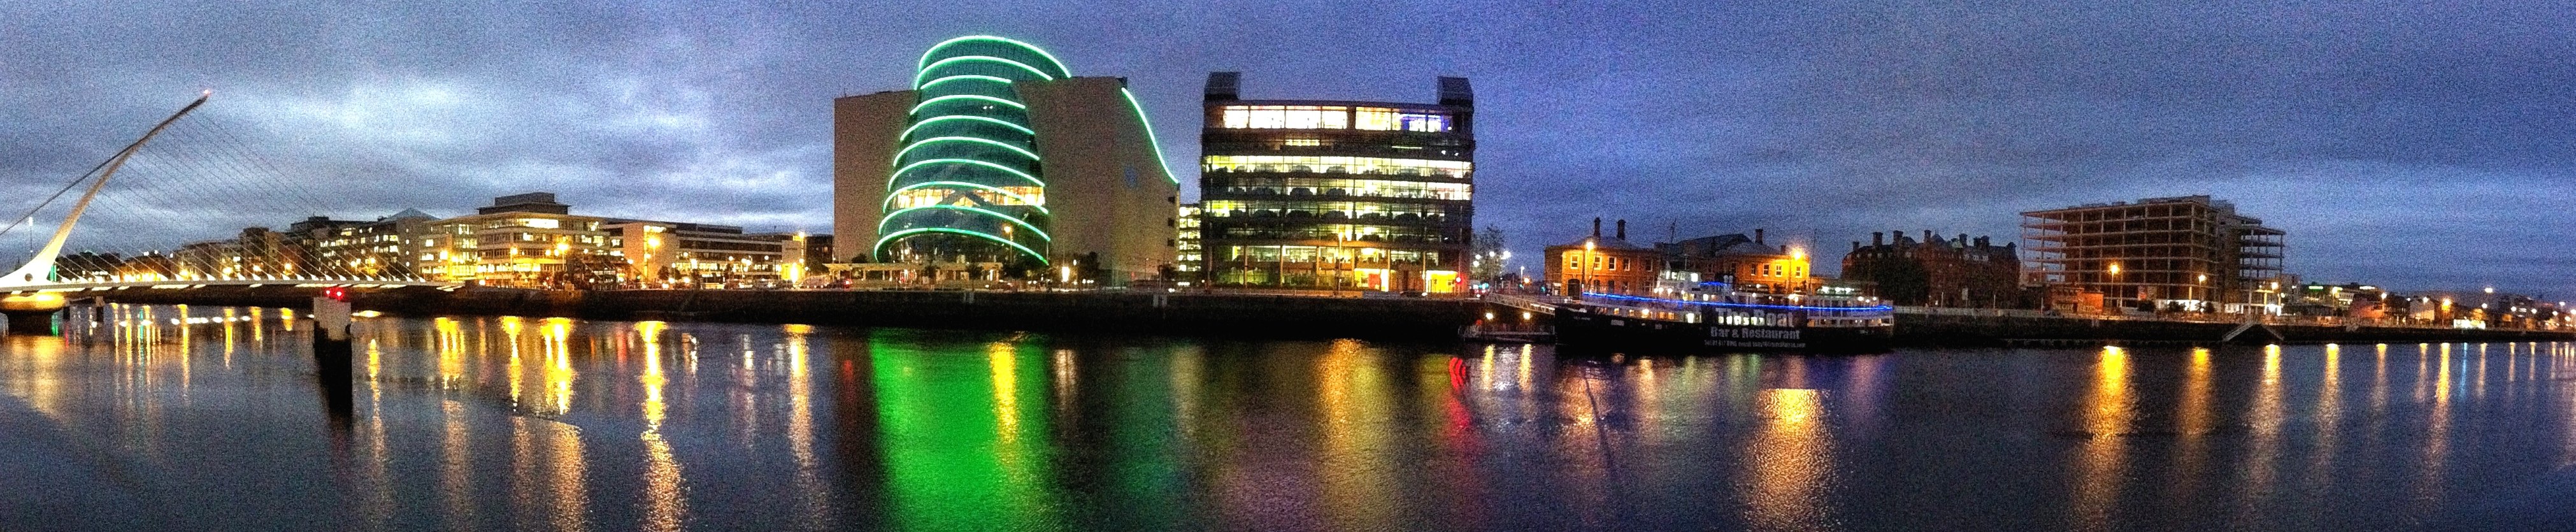 dublin-quays-panorama-cropped-version-pre-processing